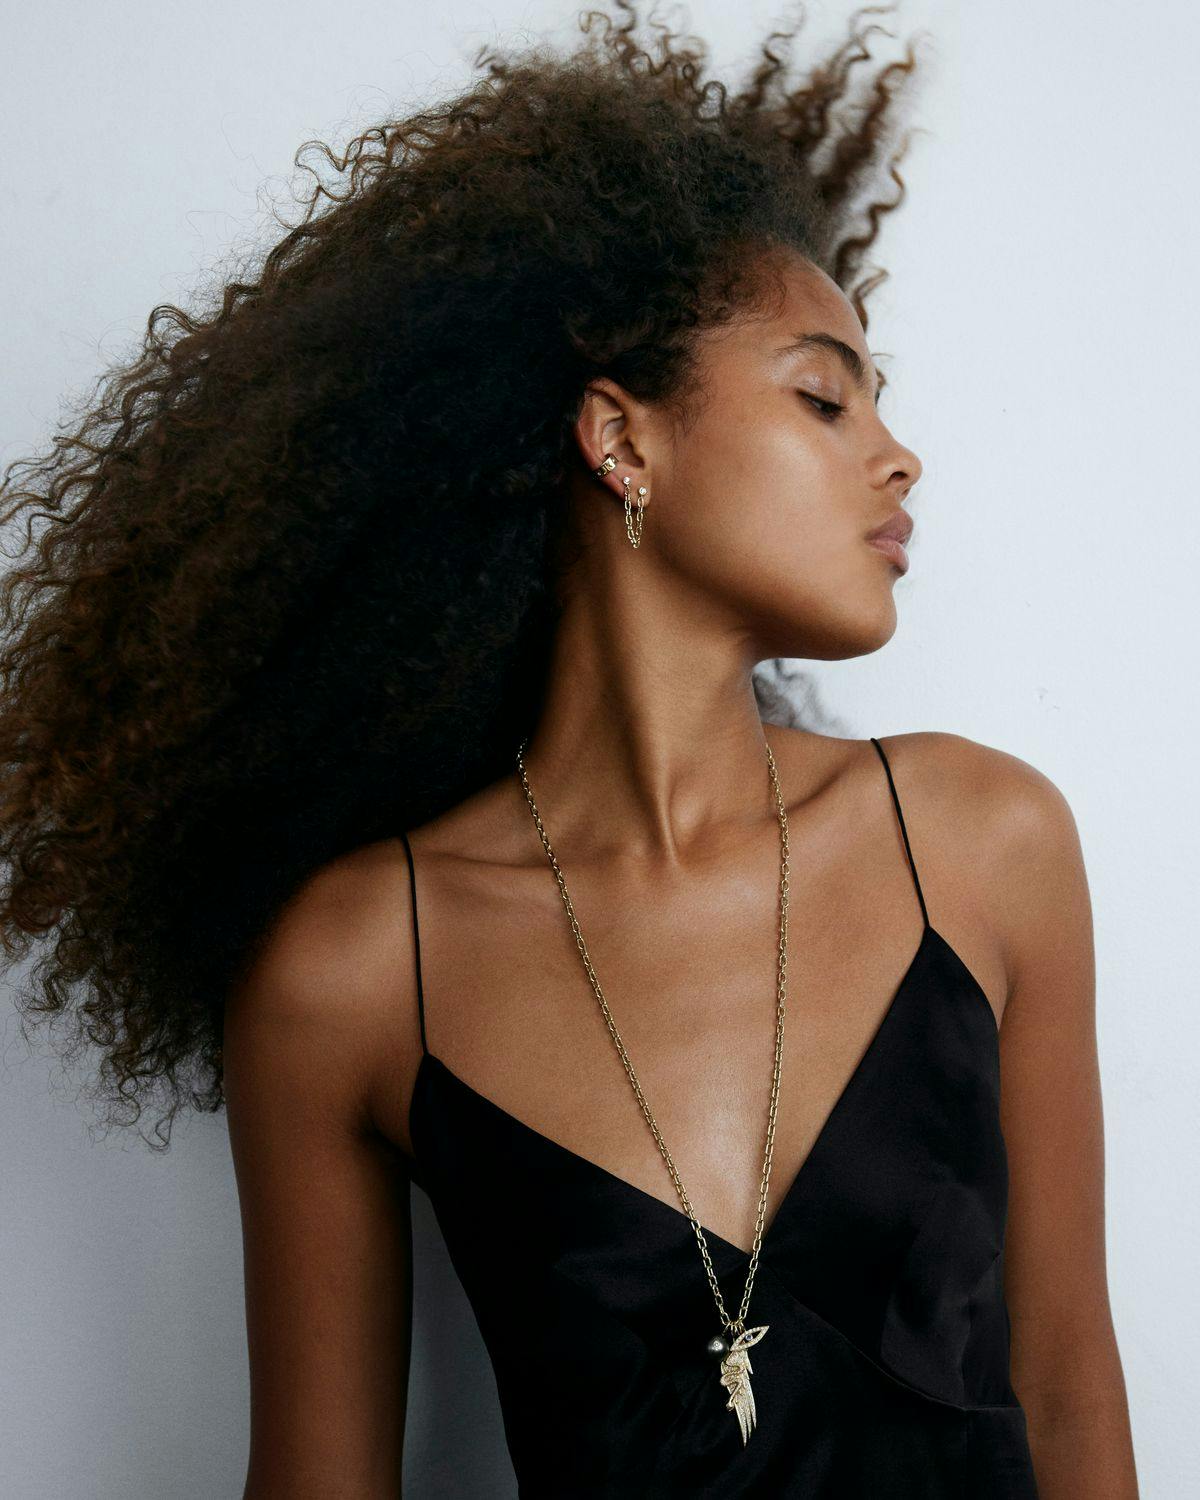 Model with natural hair wearing long chain with assorted charms over black camisole. 